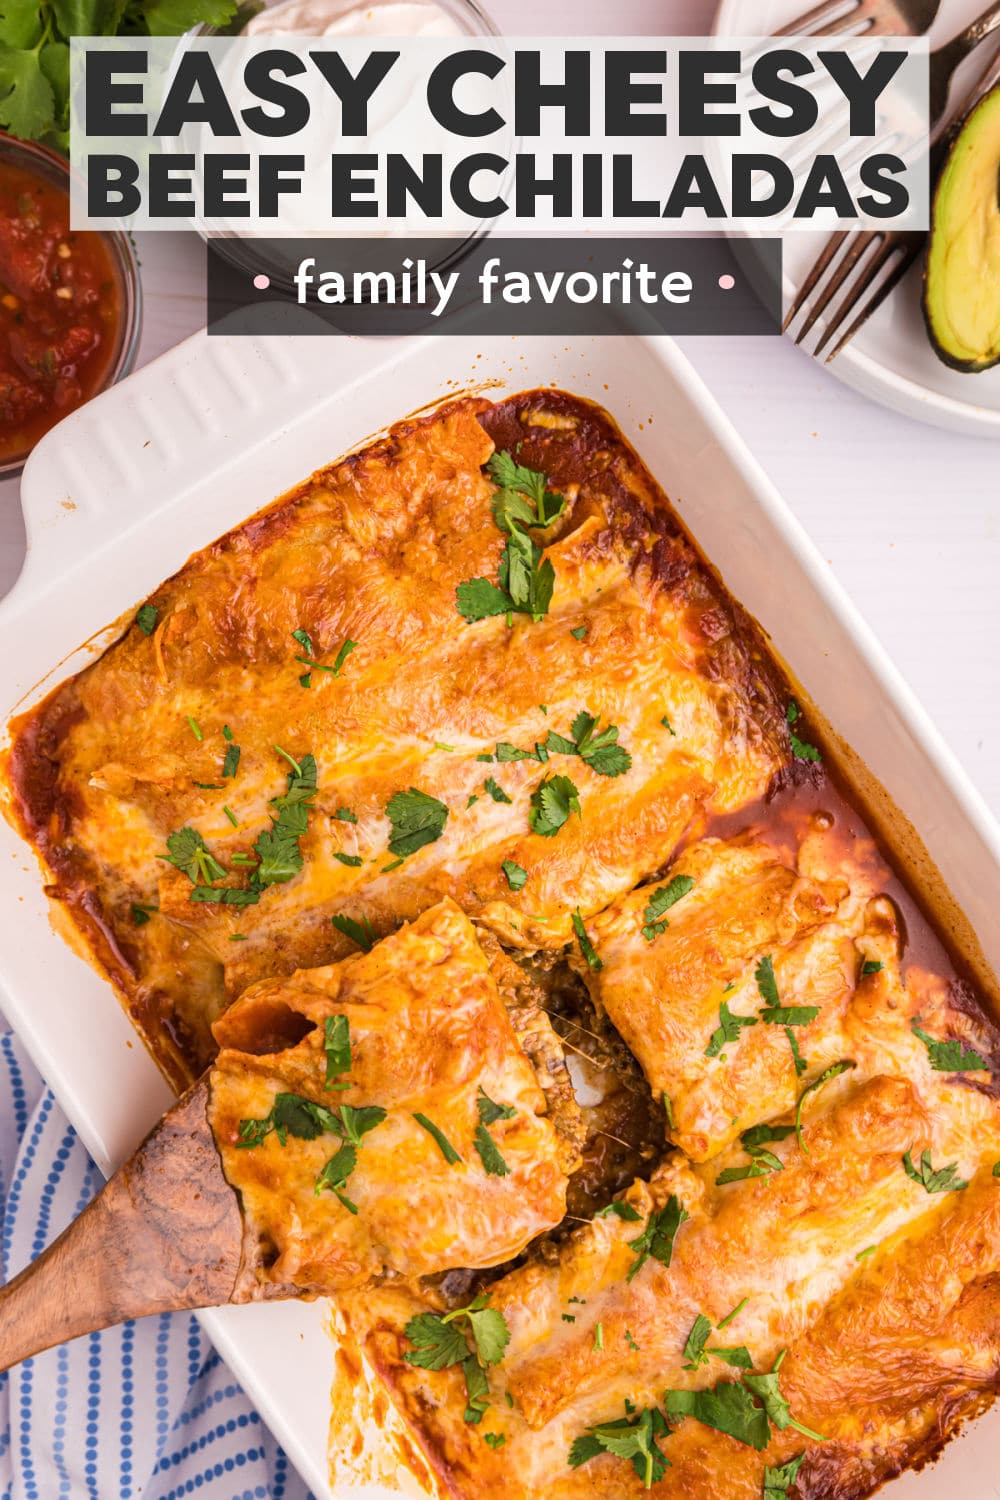 This easy Ground Beef Enchiladas recipe starts with tortillas that are filled with a seasoned ground sirloin mixture, topped with a flavorful enchilada sauce, sprinkled with shredded colby jack, and baked until cheesy and gooey. | www.persnicketyplates.com